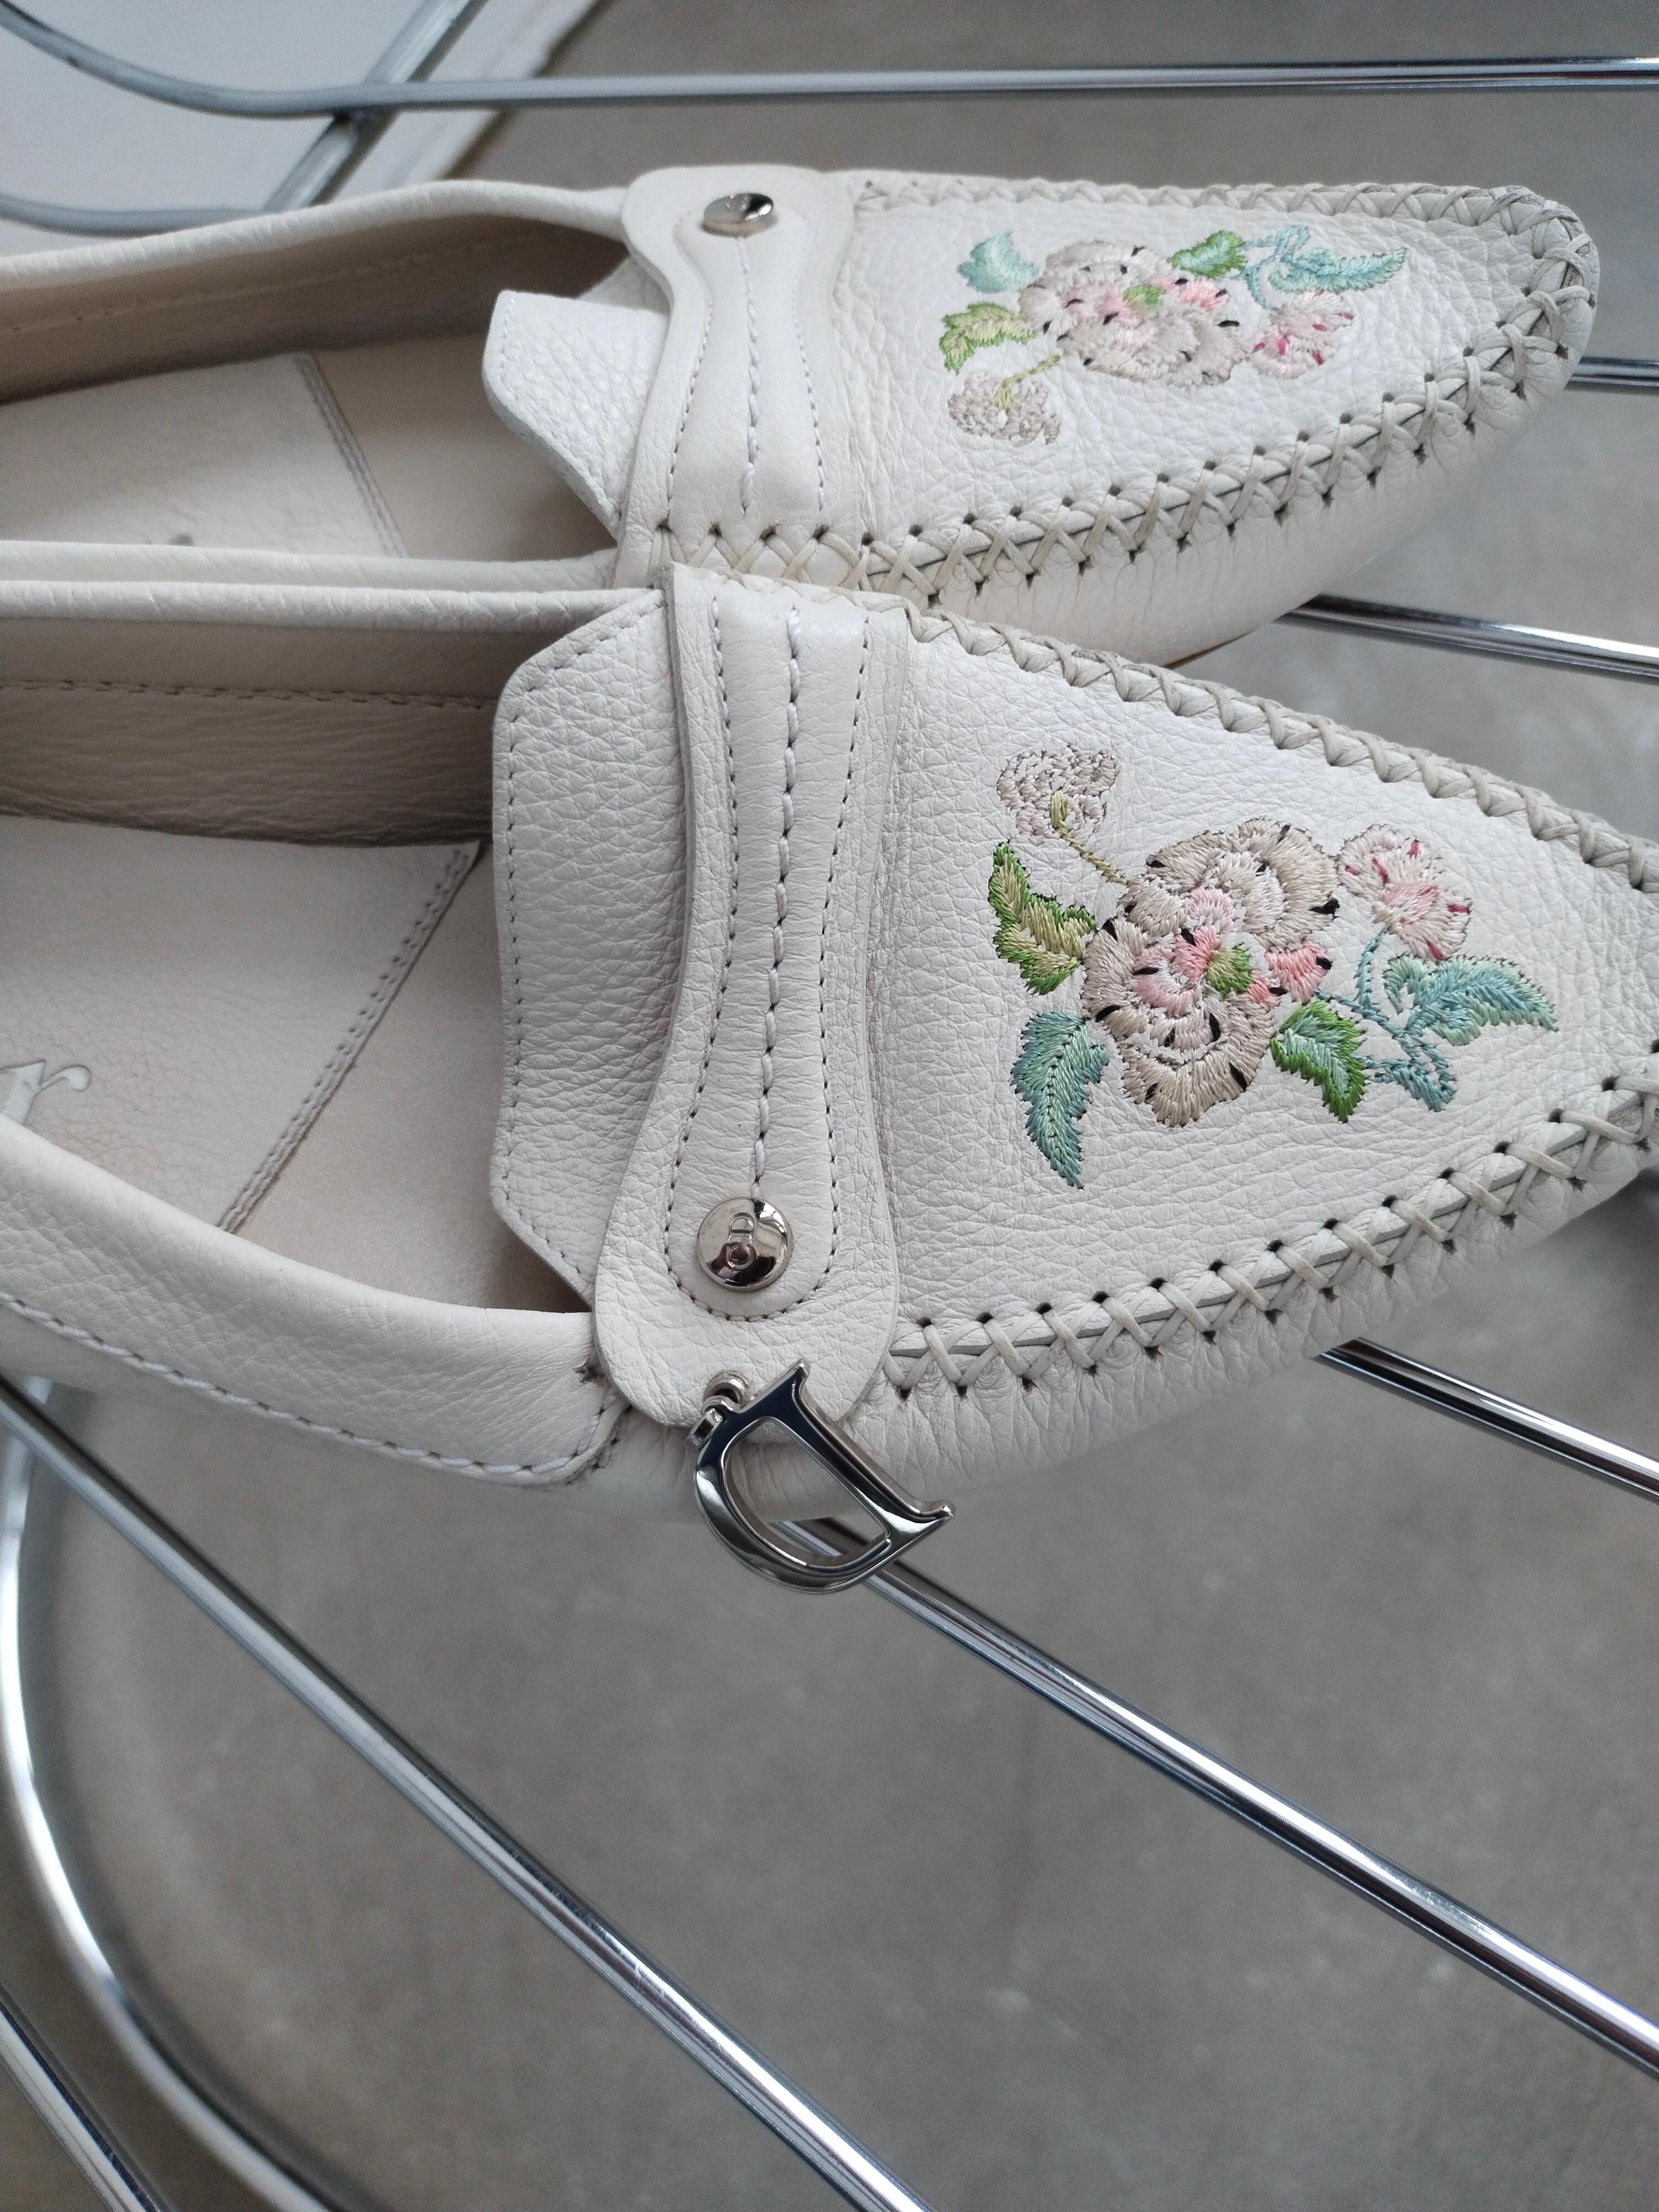 Christian Dior & John Galliano 2006 Calfskin Loafers Shoes D Charm SZ 39 In Good Condition For Sale In Алматинский Почтамт, KZ